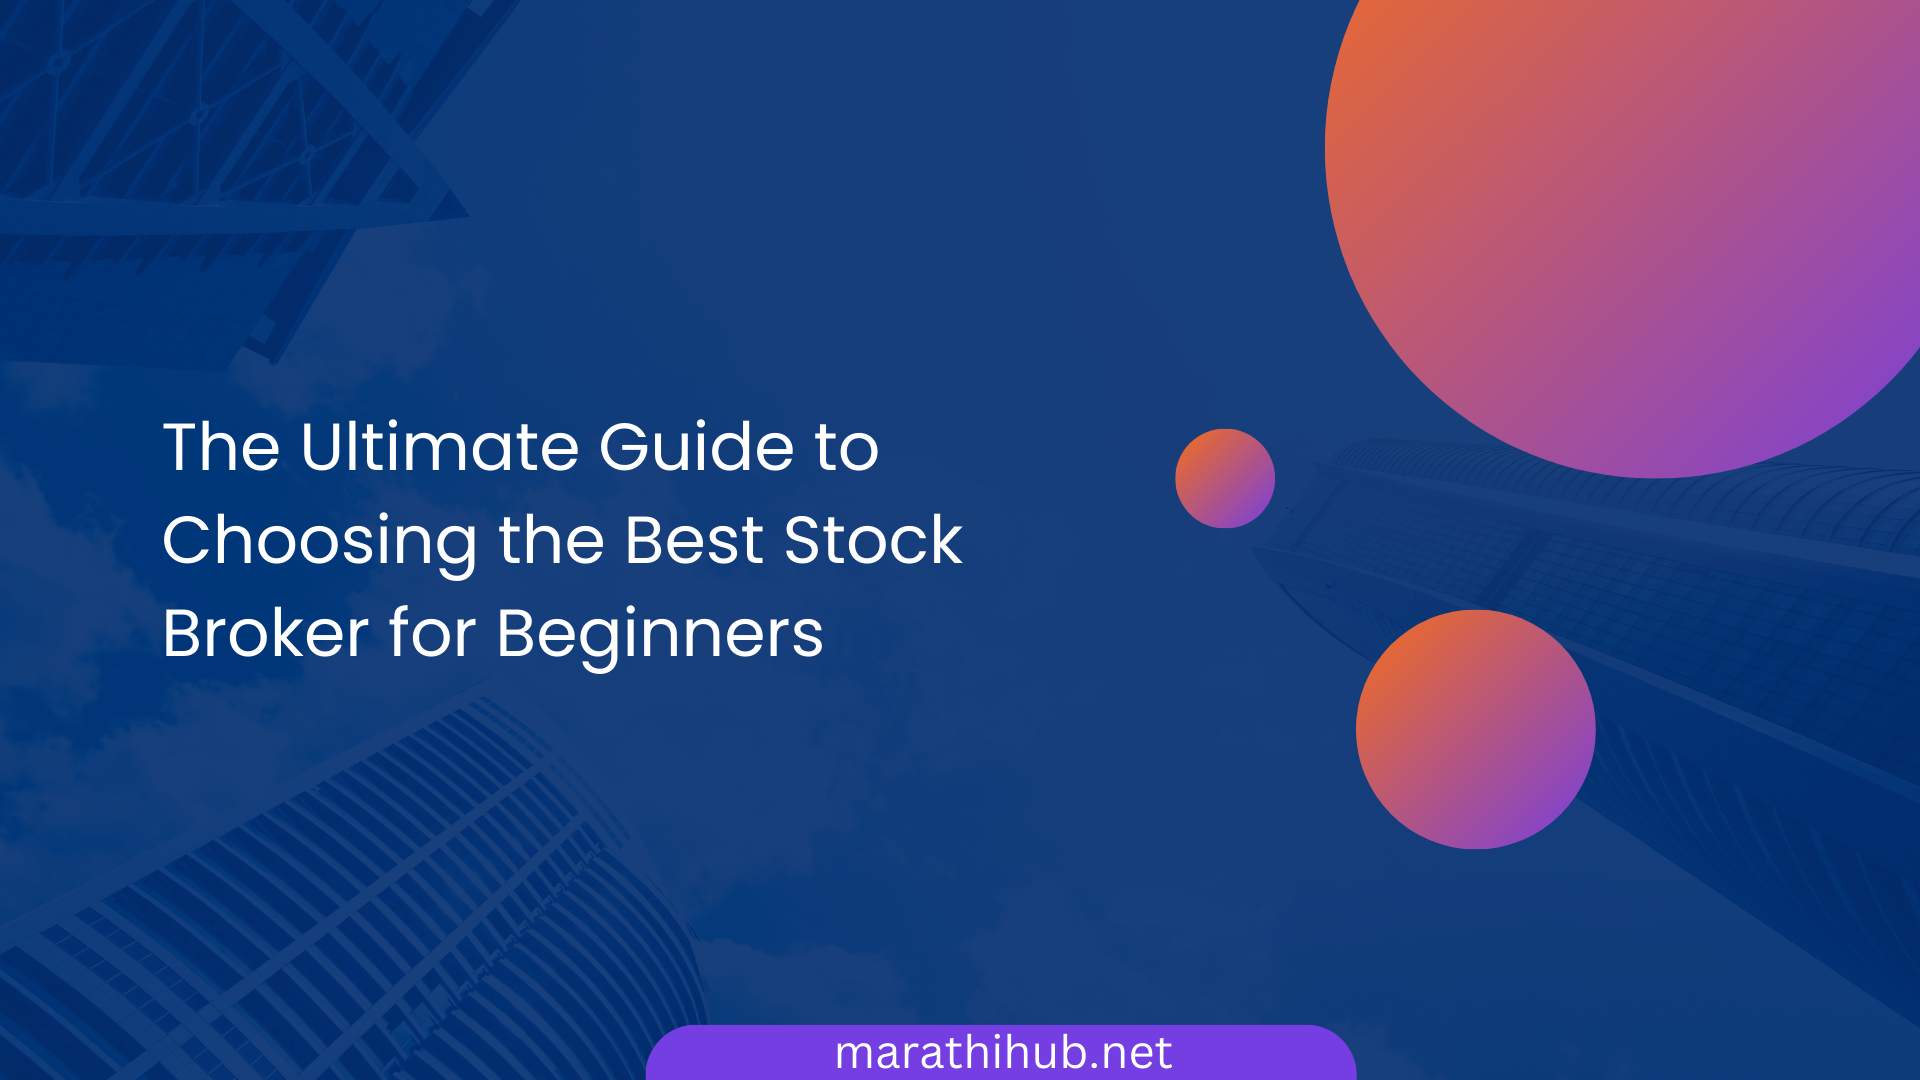 The Ultimate Guide to Choosing the Best Stock Broker for Beginners